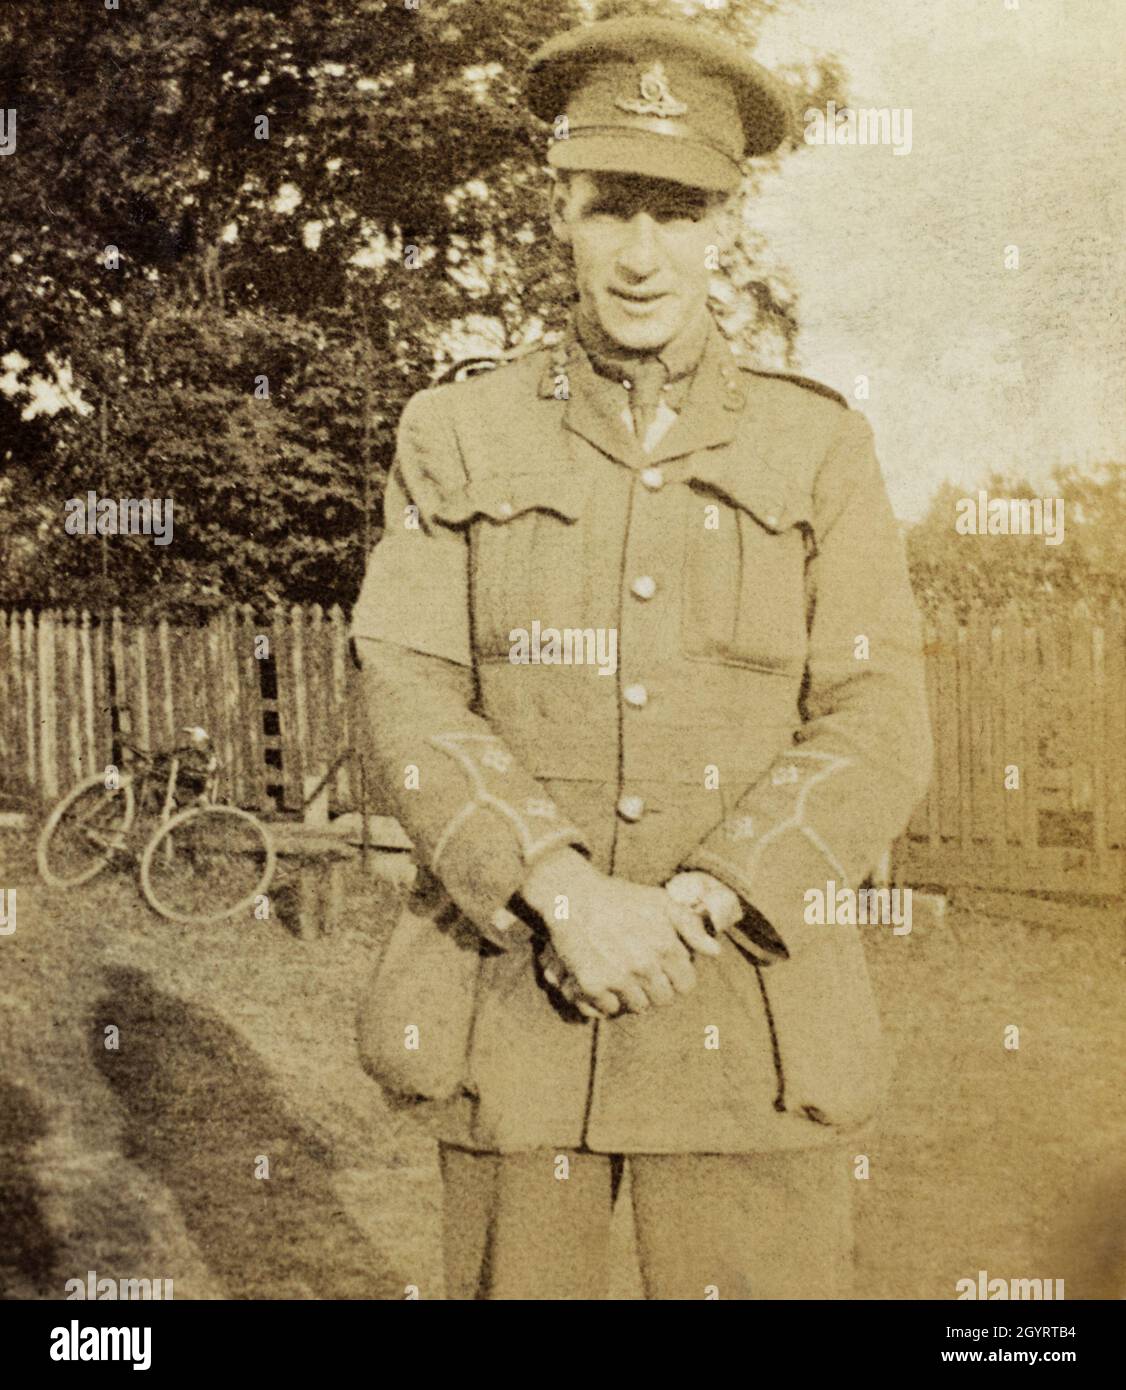 A First World War era portrait of a British army Officer, a Lieutenant in the Royal Artillery. He is wearing an armband on his right arm, possibly indicating he was wounded and convalescing in hospital. Stock Photo